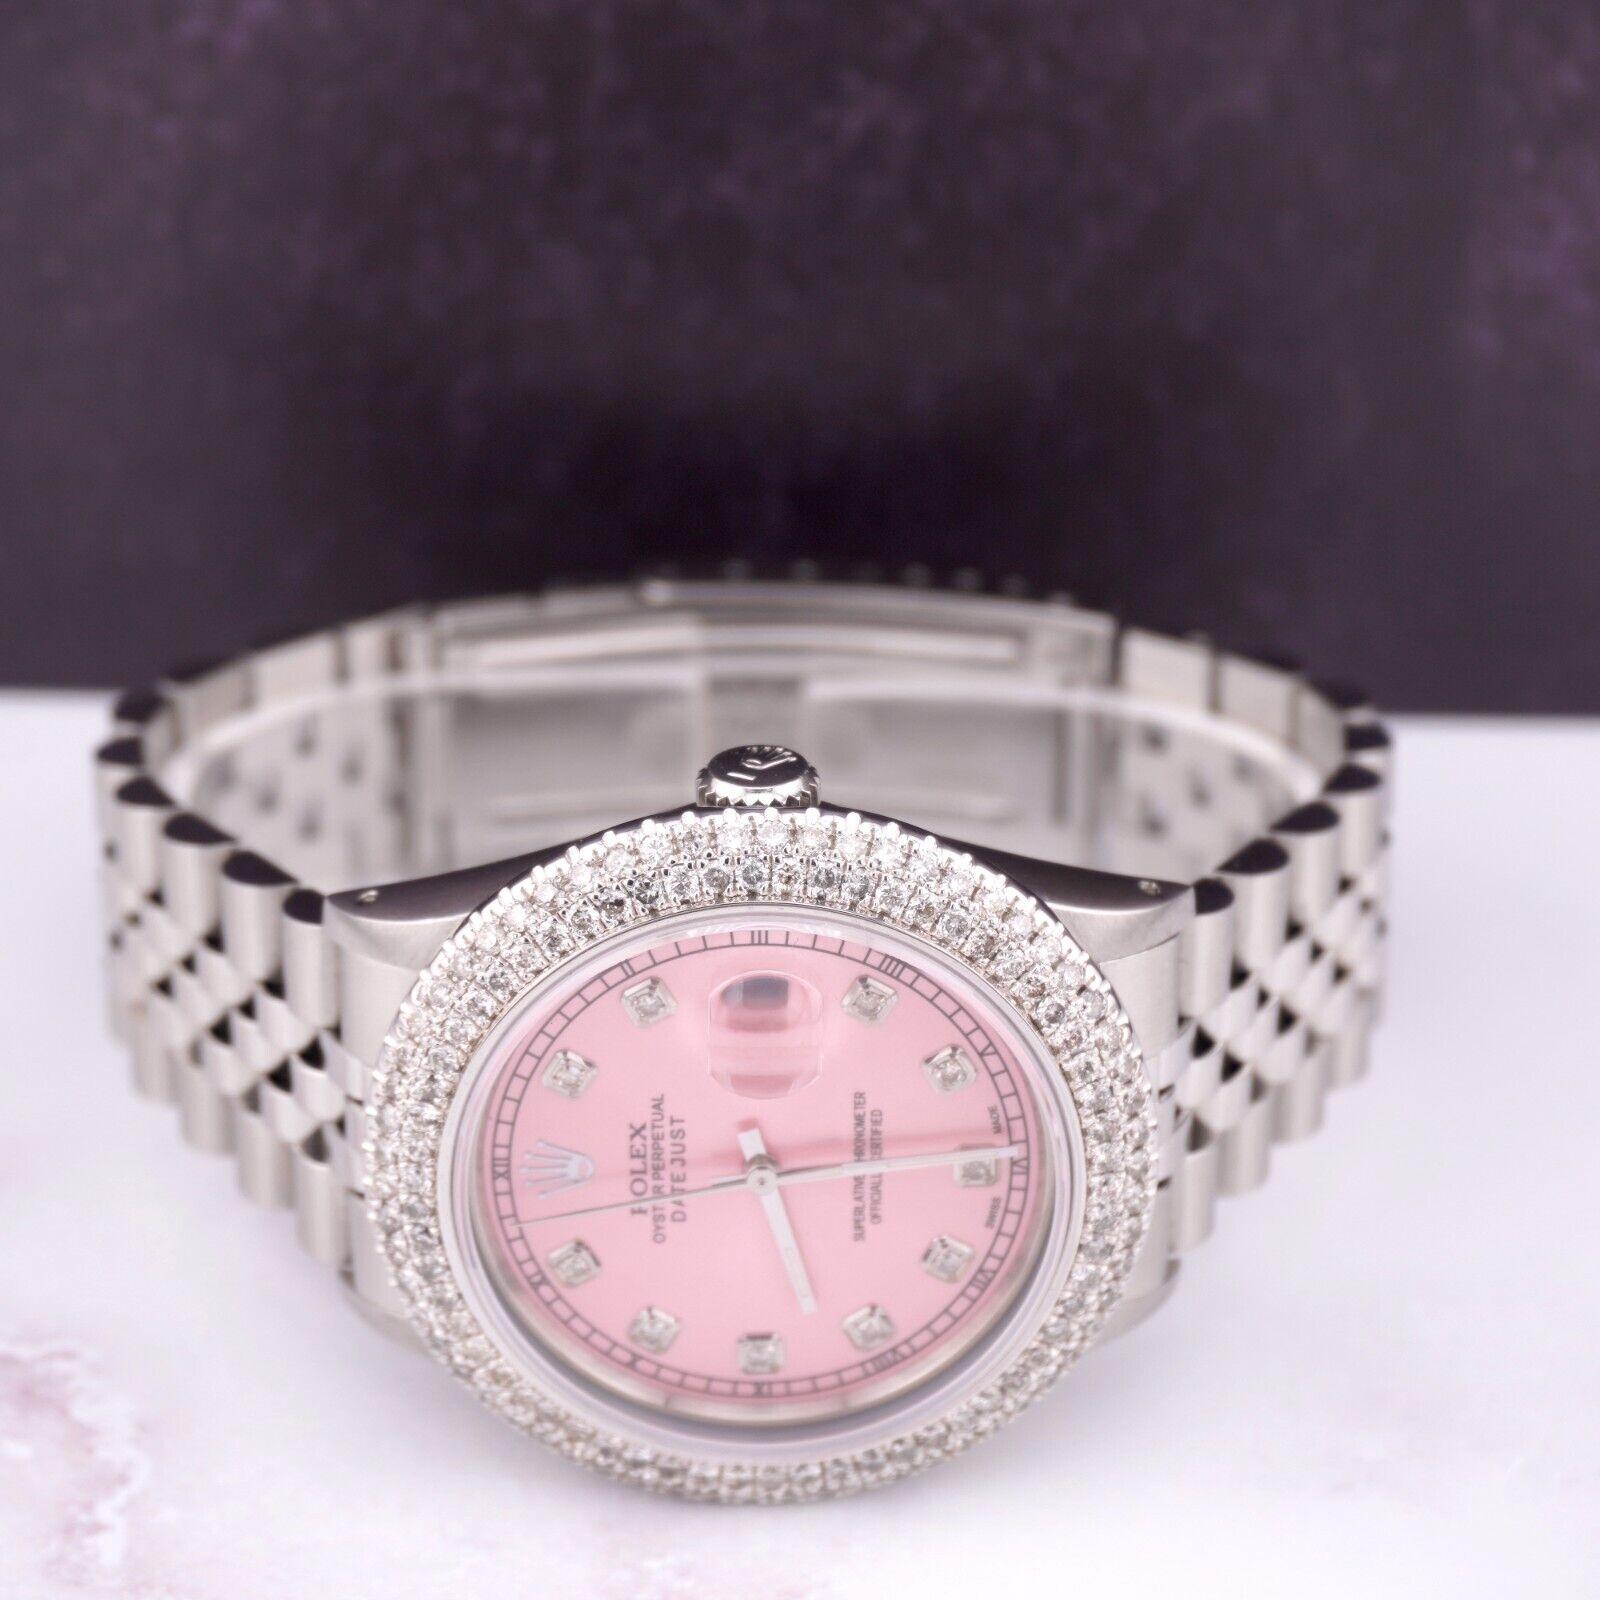 Rolex Datejust 36mm Jubilee Steel Watch ICED 3.50ct Diamonds Pink Dial 16014 In Good Condition For Sale In Pleasanton, CA